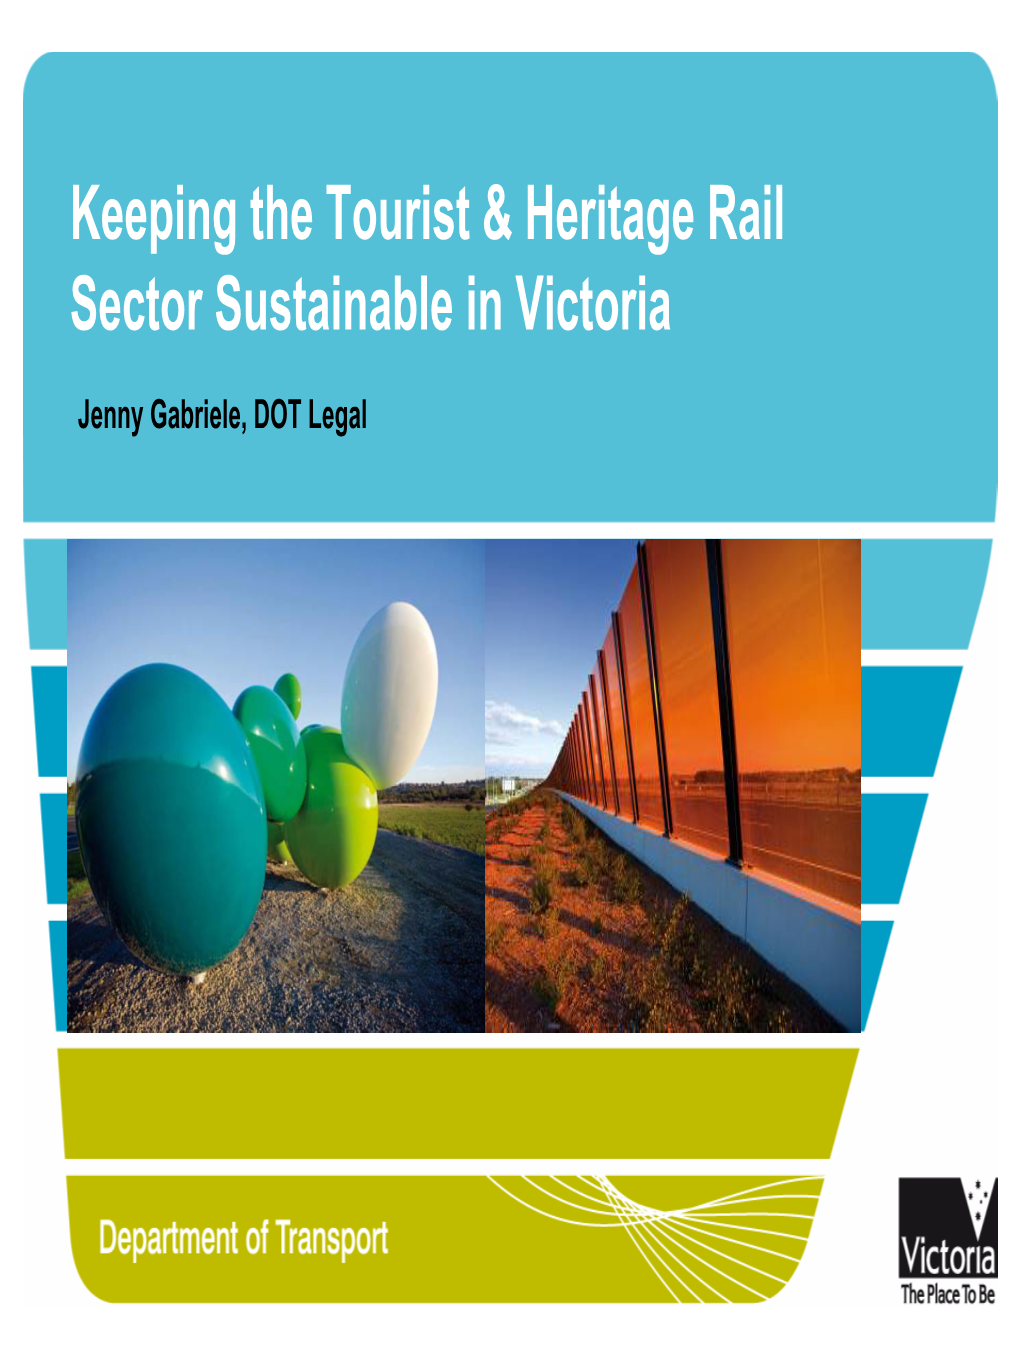 Keeping the Tourist and Heritage Sector in Victoria Sustainable